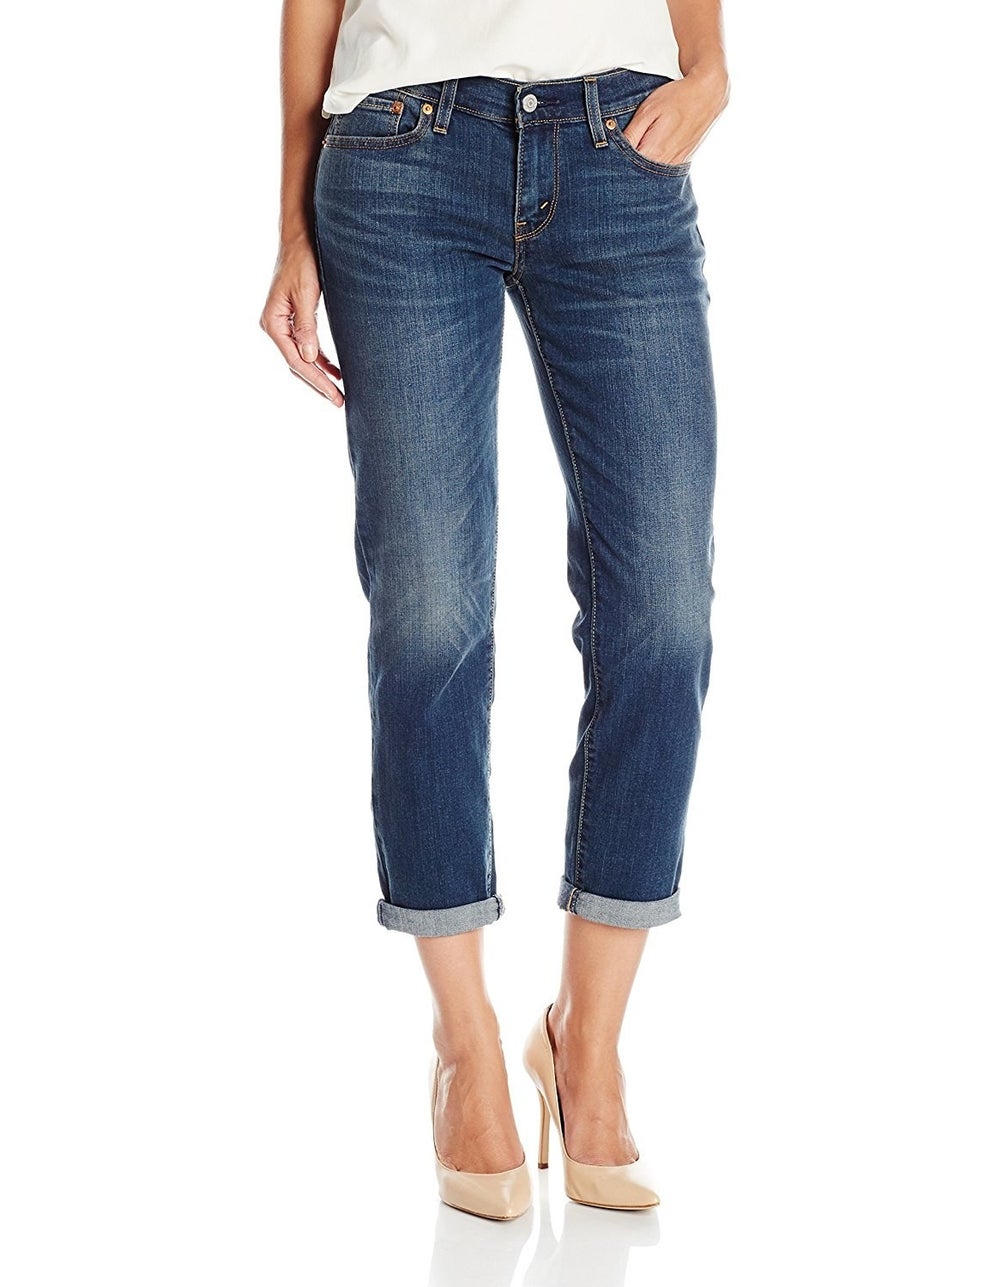 22 Ridiculously Comfortable Pairs Of Boyfriend Jeans